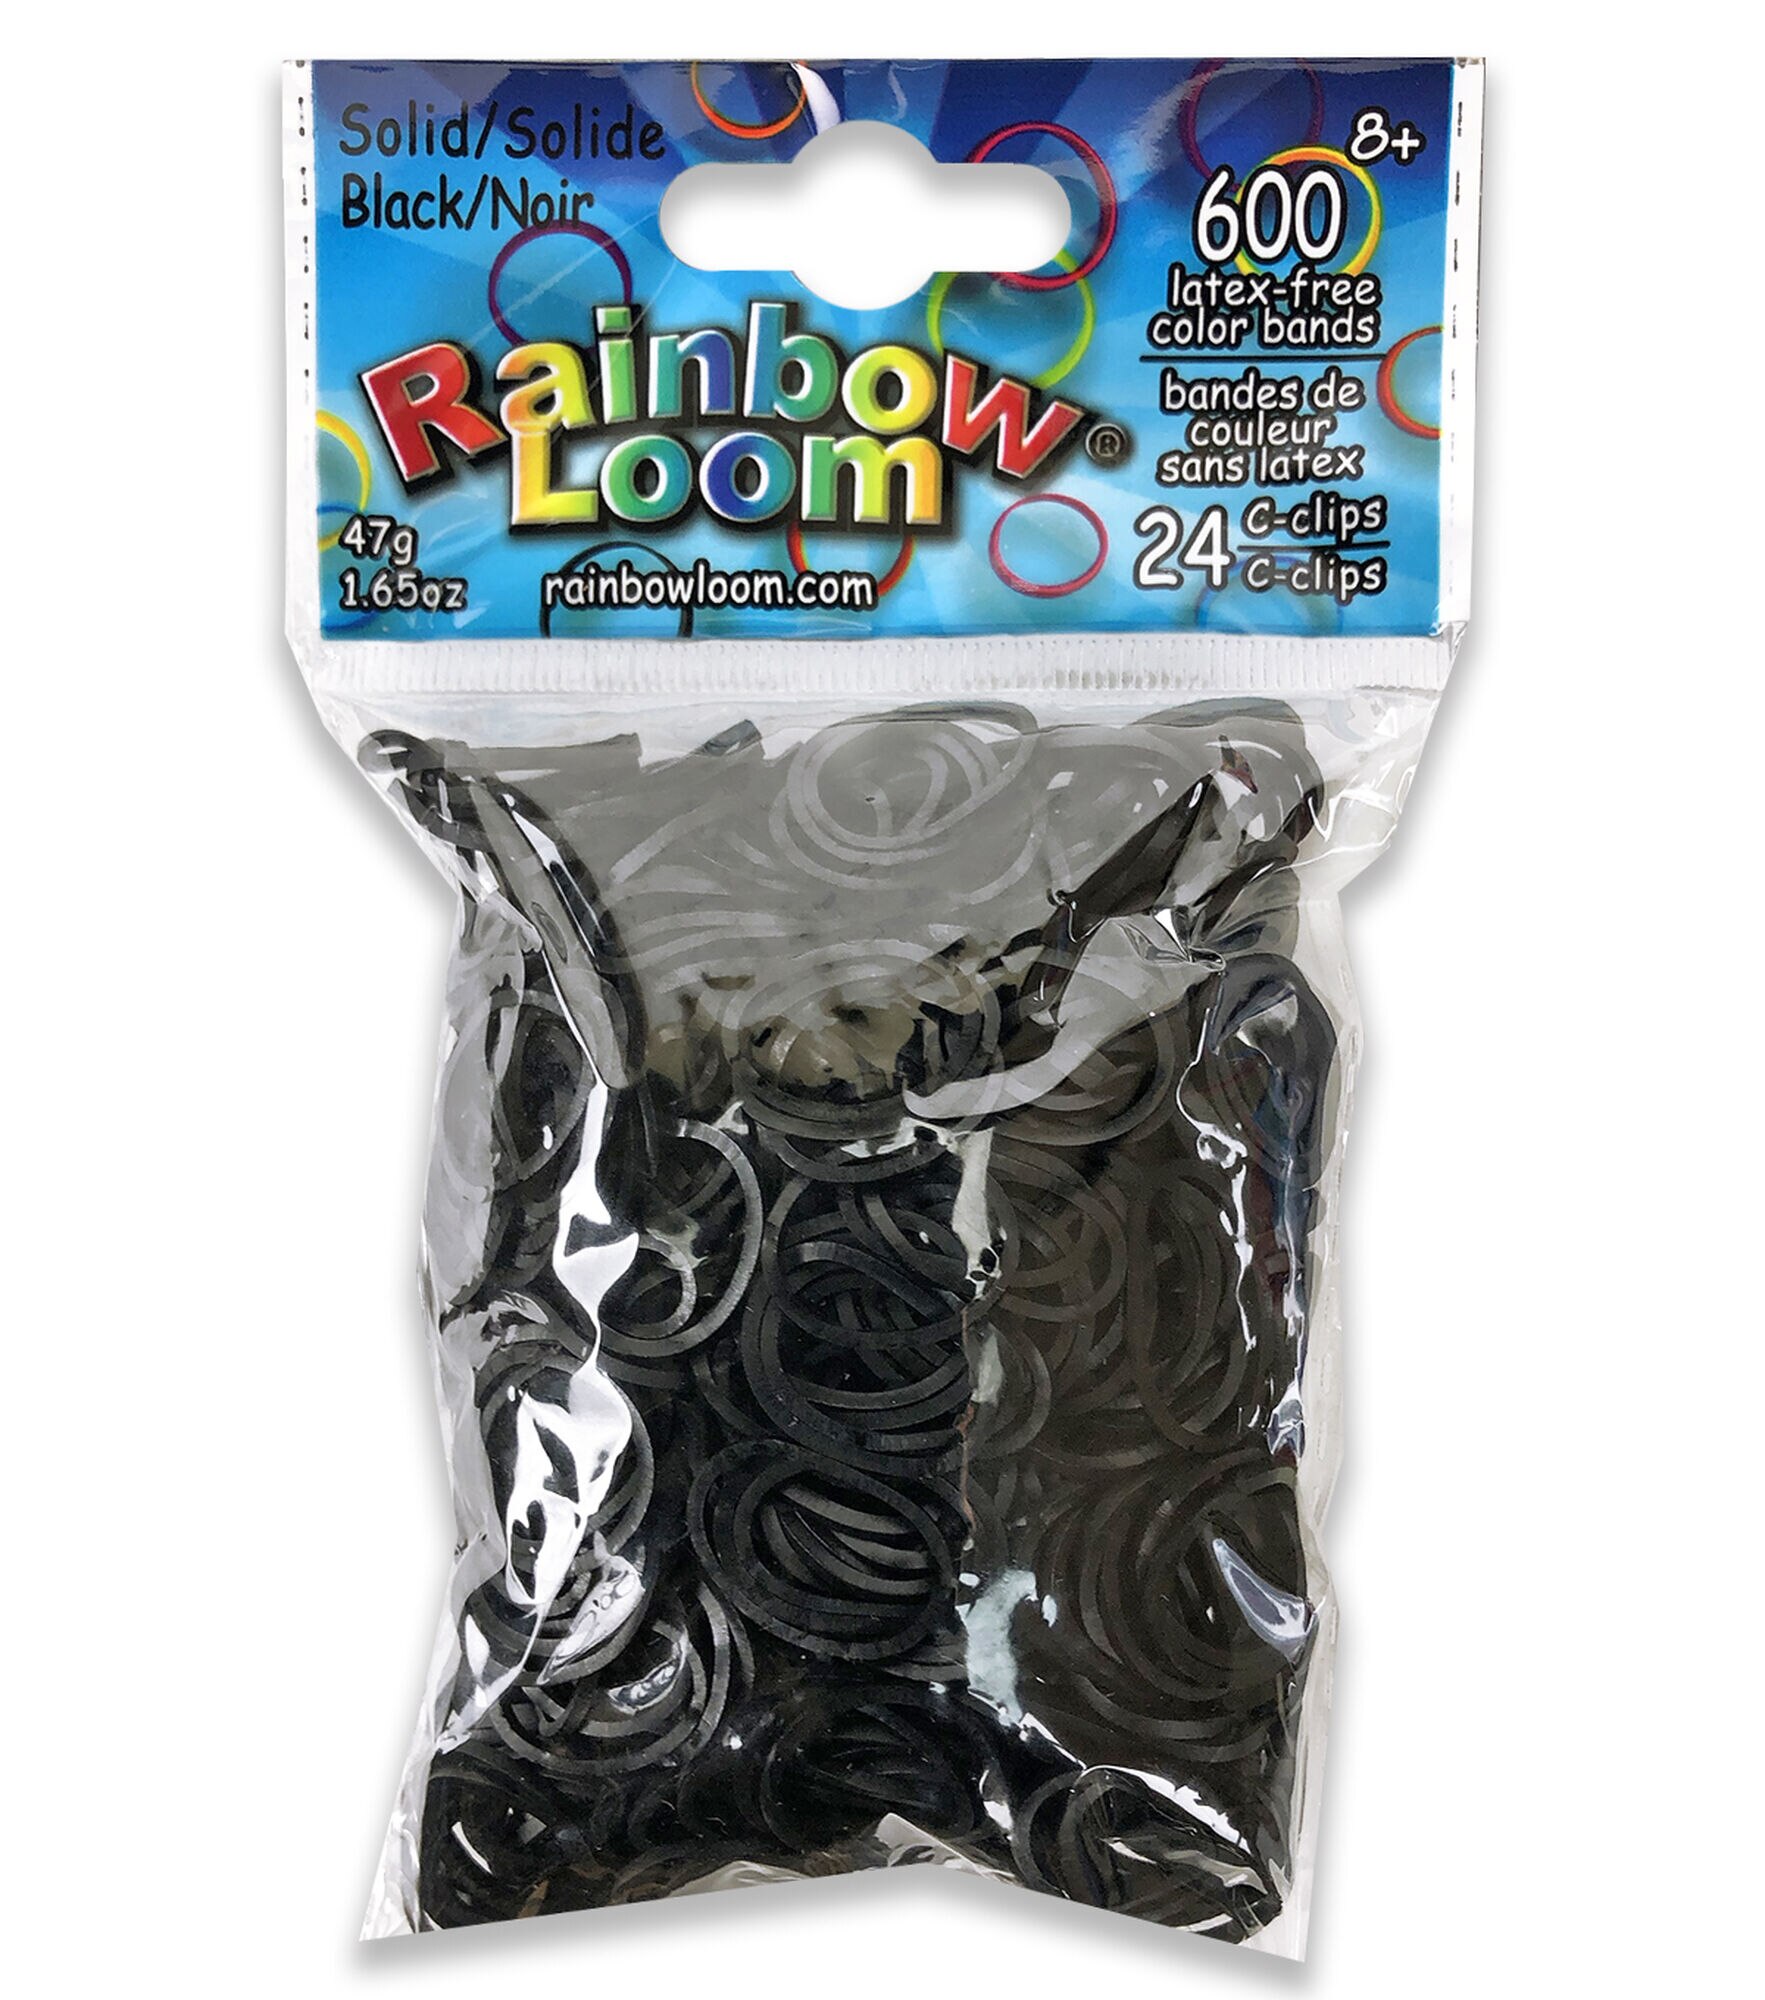 USA Mix Rainbow Loom Refill 300 Bands & 12 C-clips for sale online